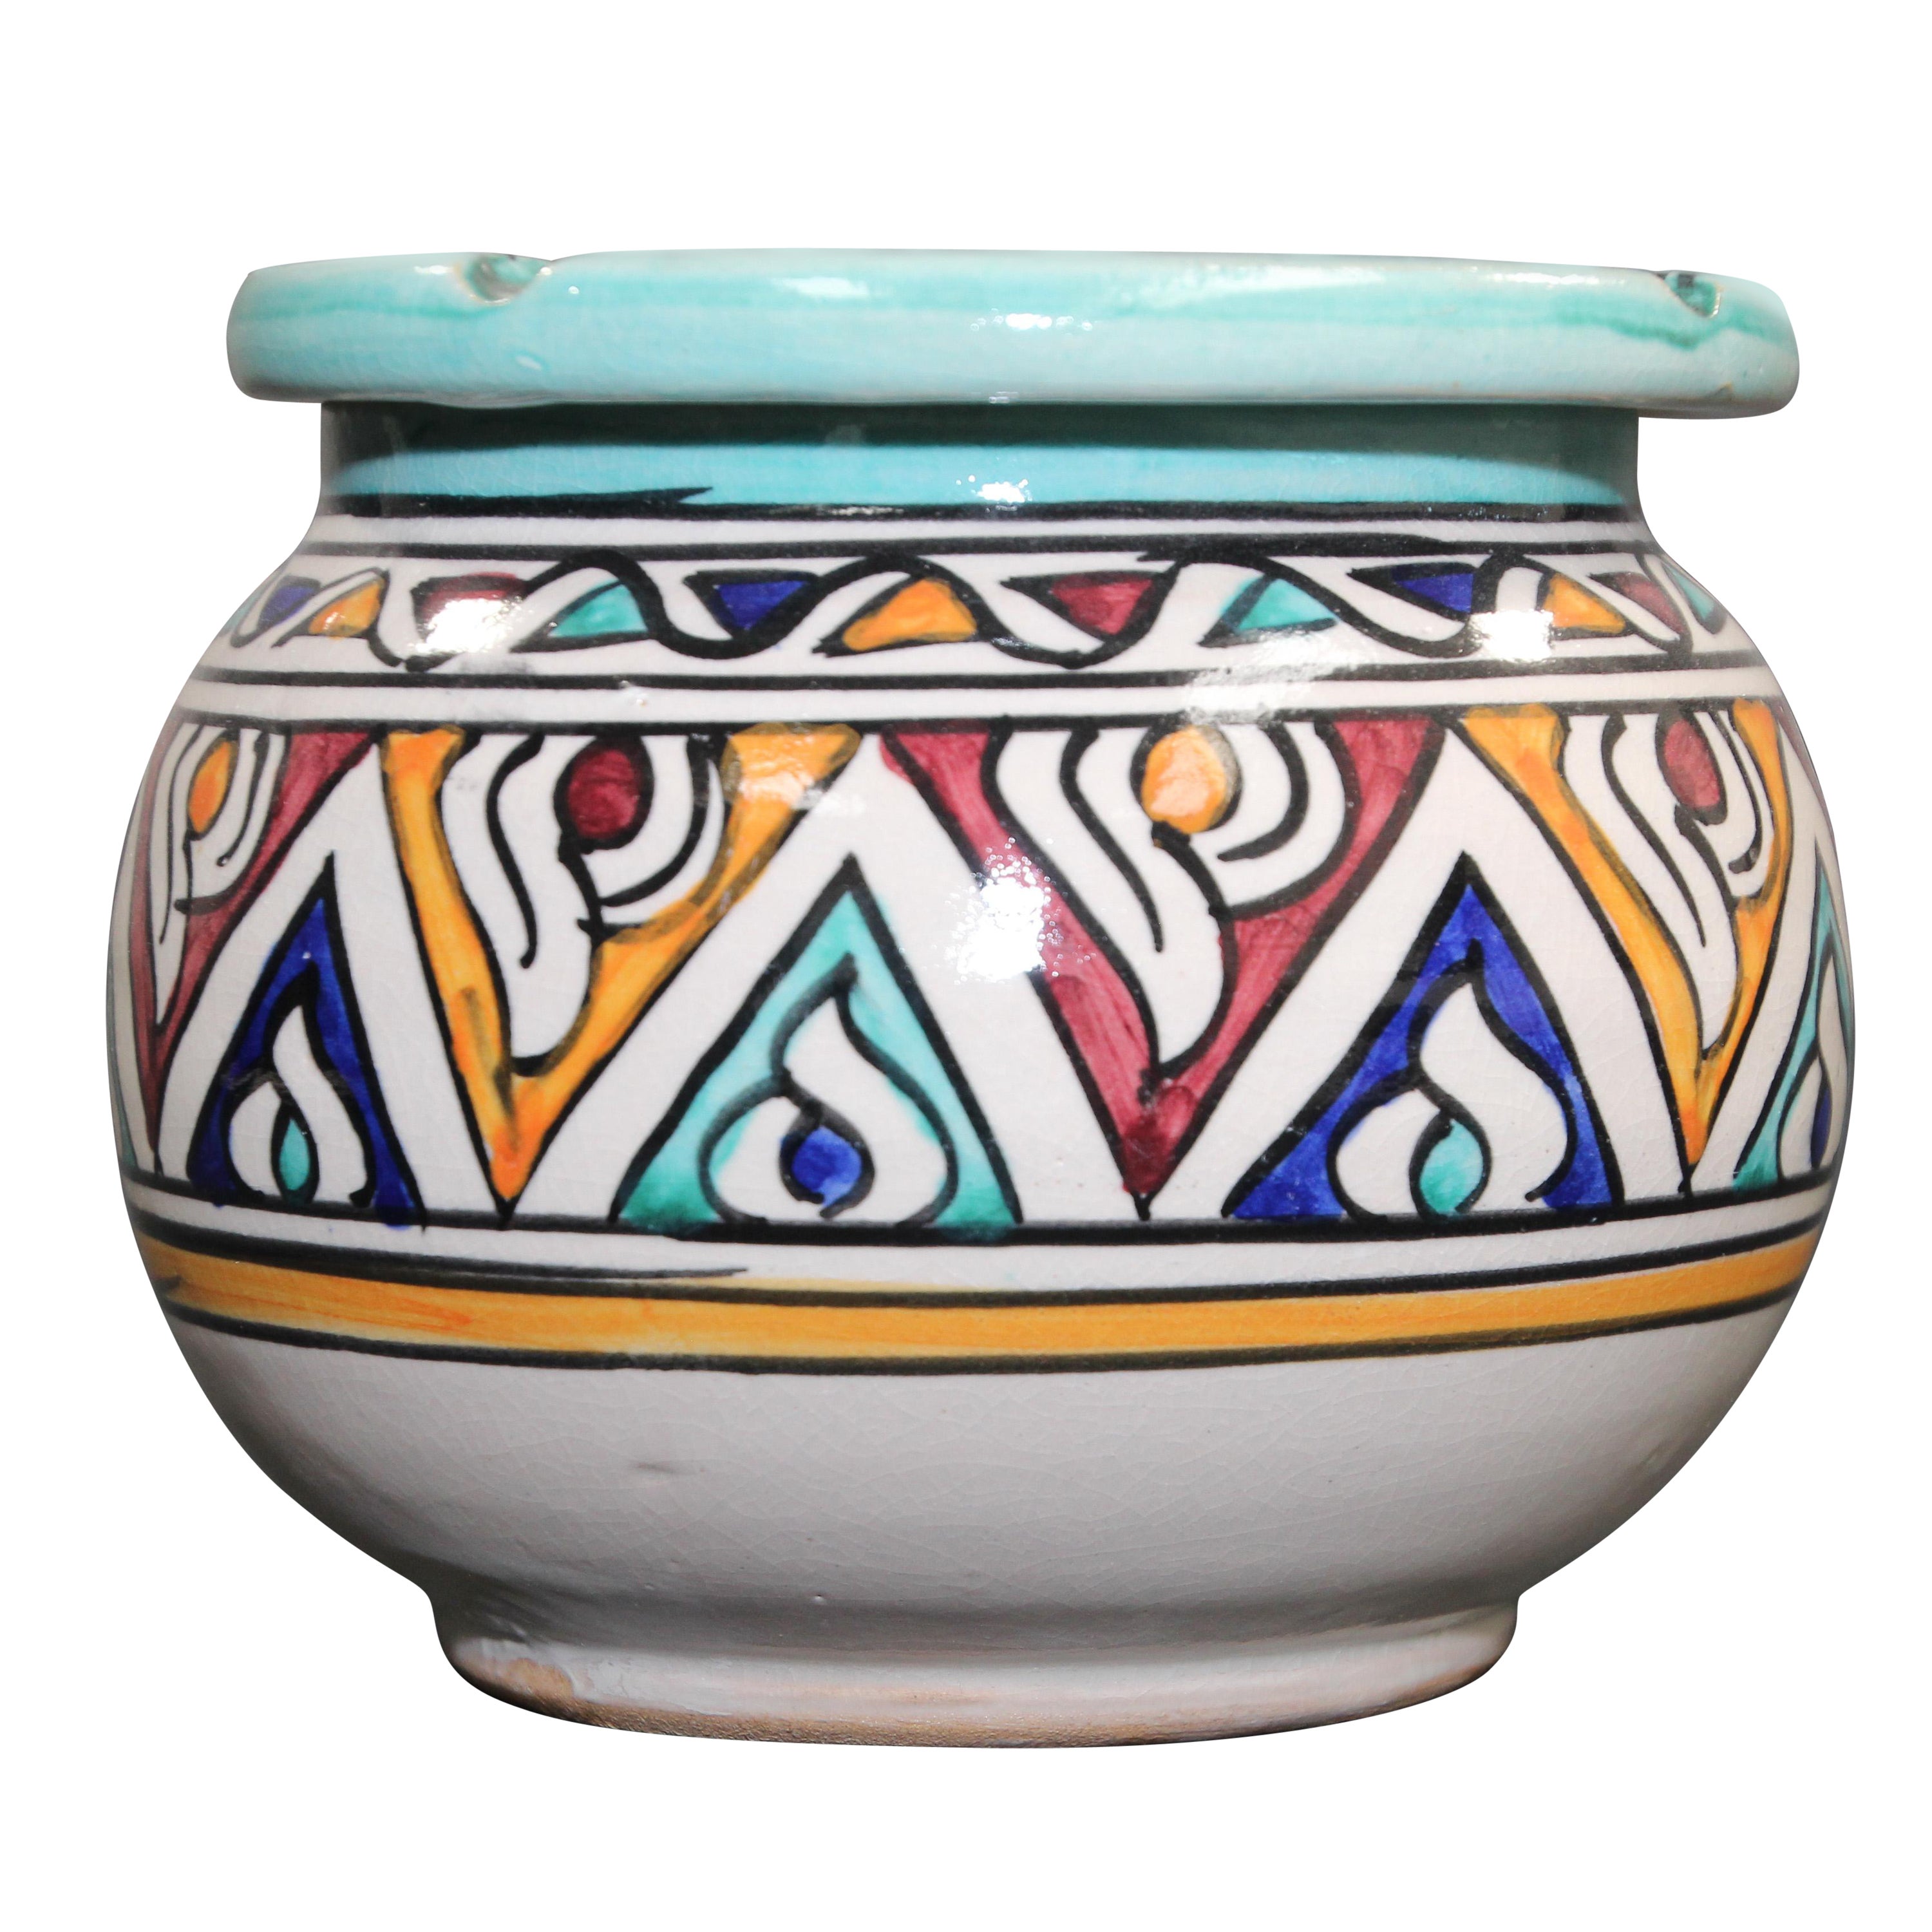 Ceramic Hand-Crafted Moroccan Covered Ashtray from Fez